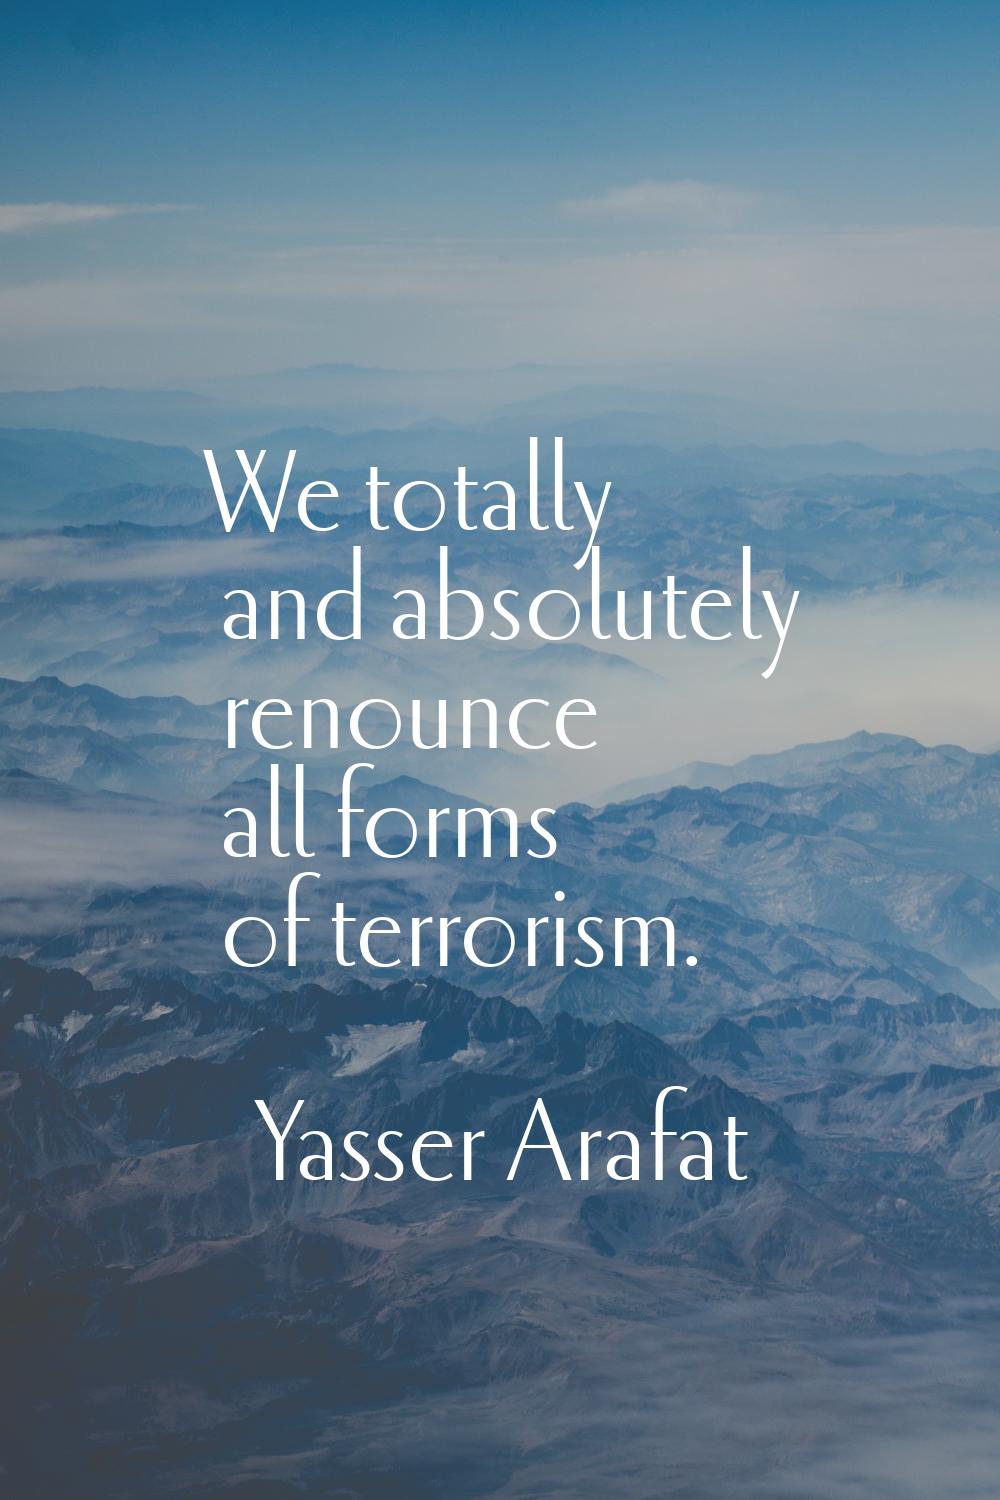 We totally and absolutely renounce all forms of terrorism.